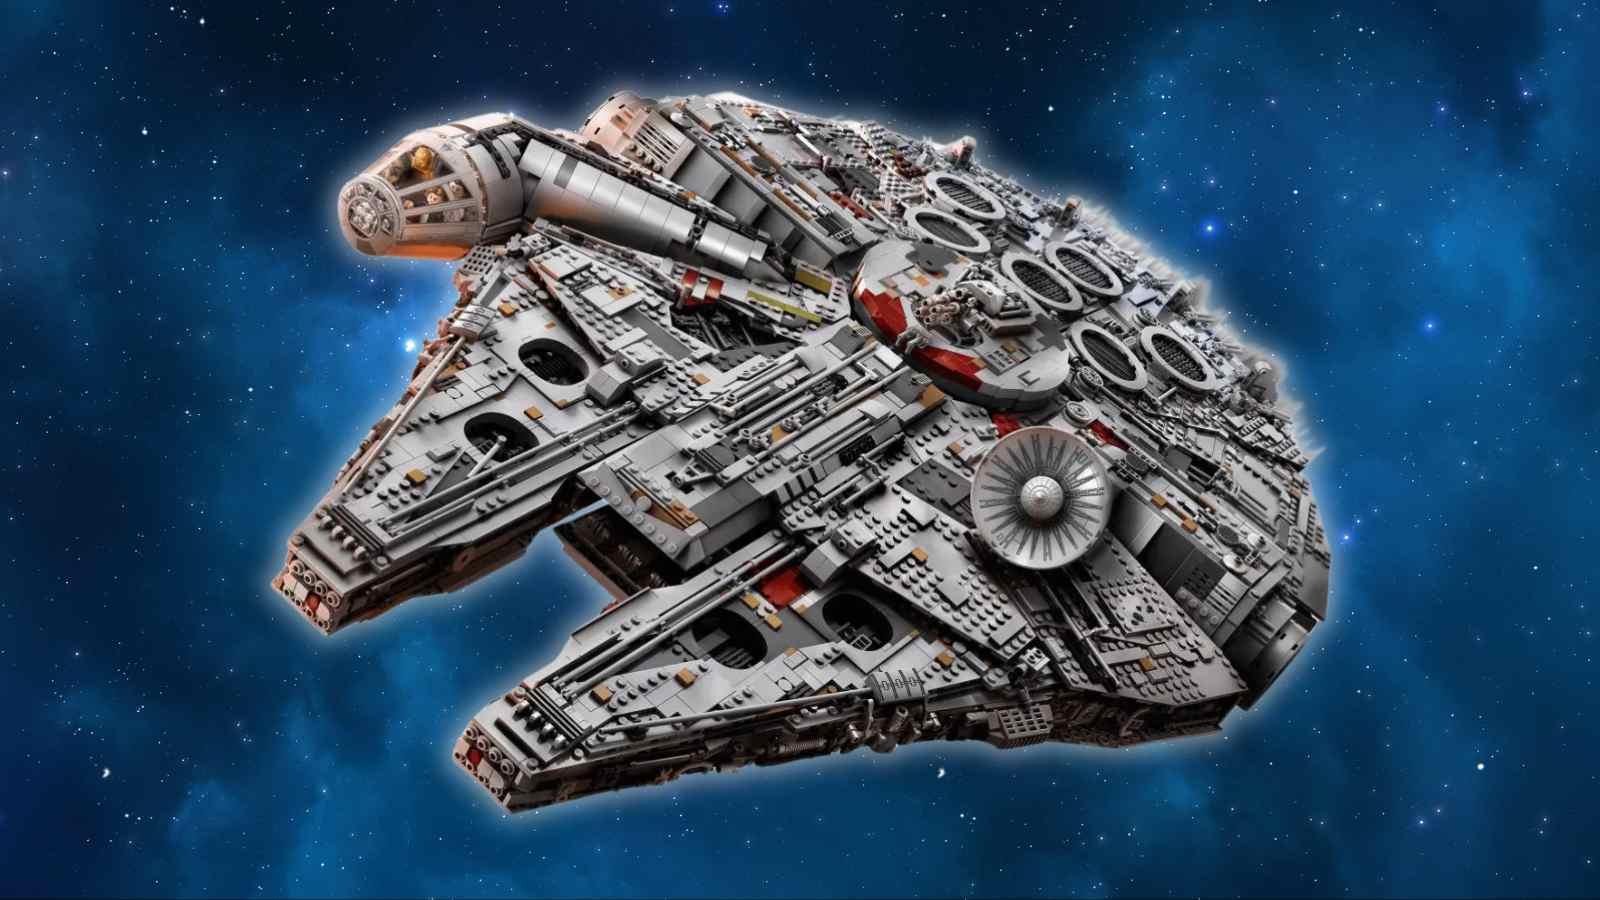 The LEGO Star Wars Ultimate Collector Series Millennium Falcon on a galaxy background